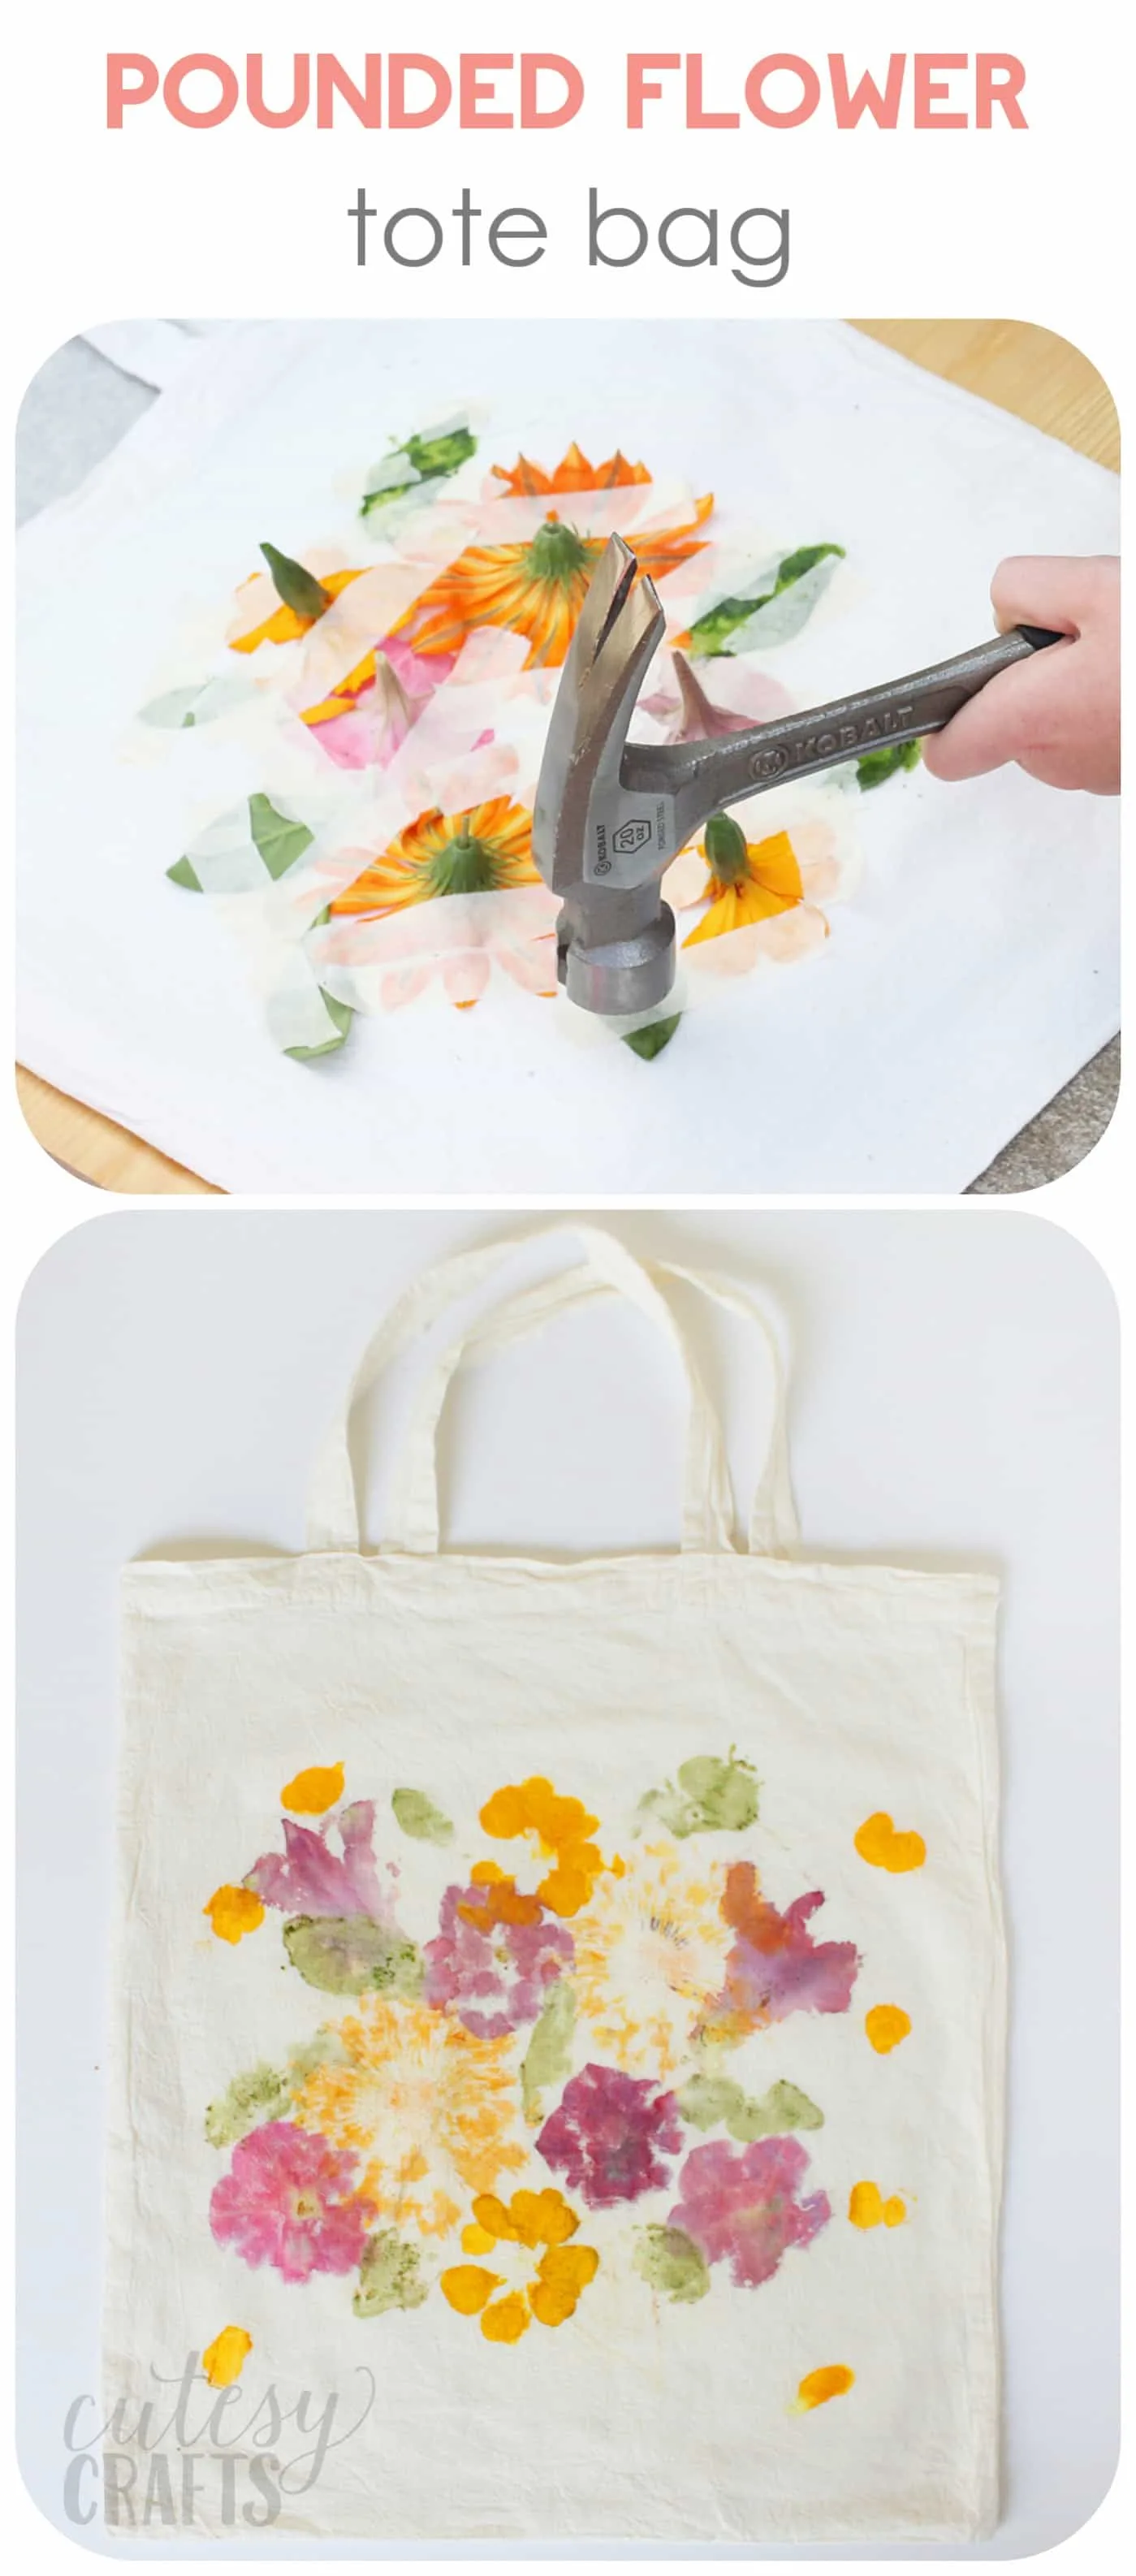 Tote made with flower pounding